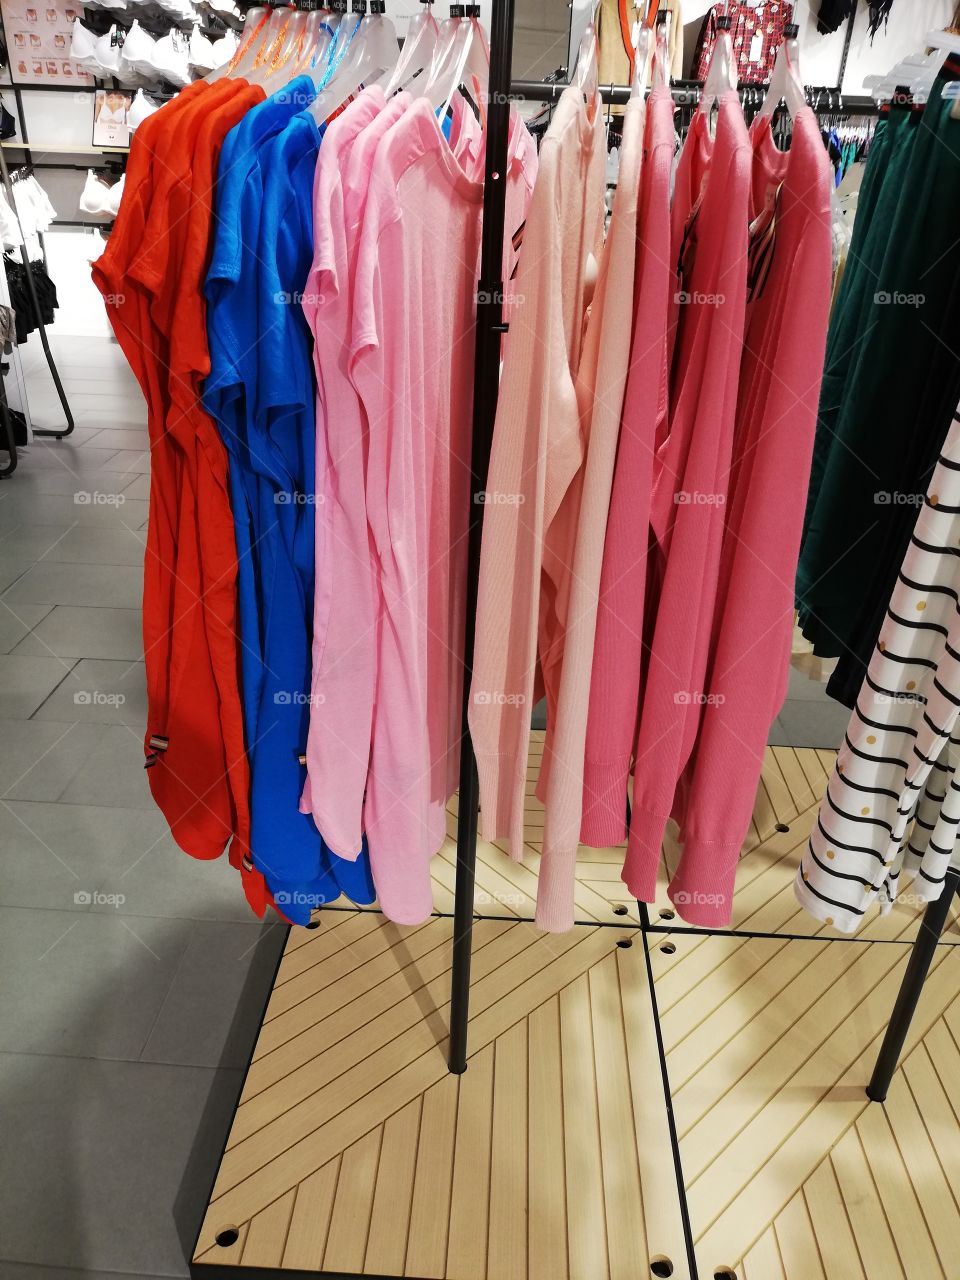 Plenty of different colors nightdresses and striped pants are hanging on the hangers on the rack, sizes are seen above the clothes. In the background white bras are shown in the bright light.